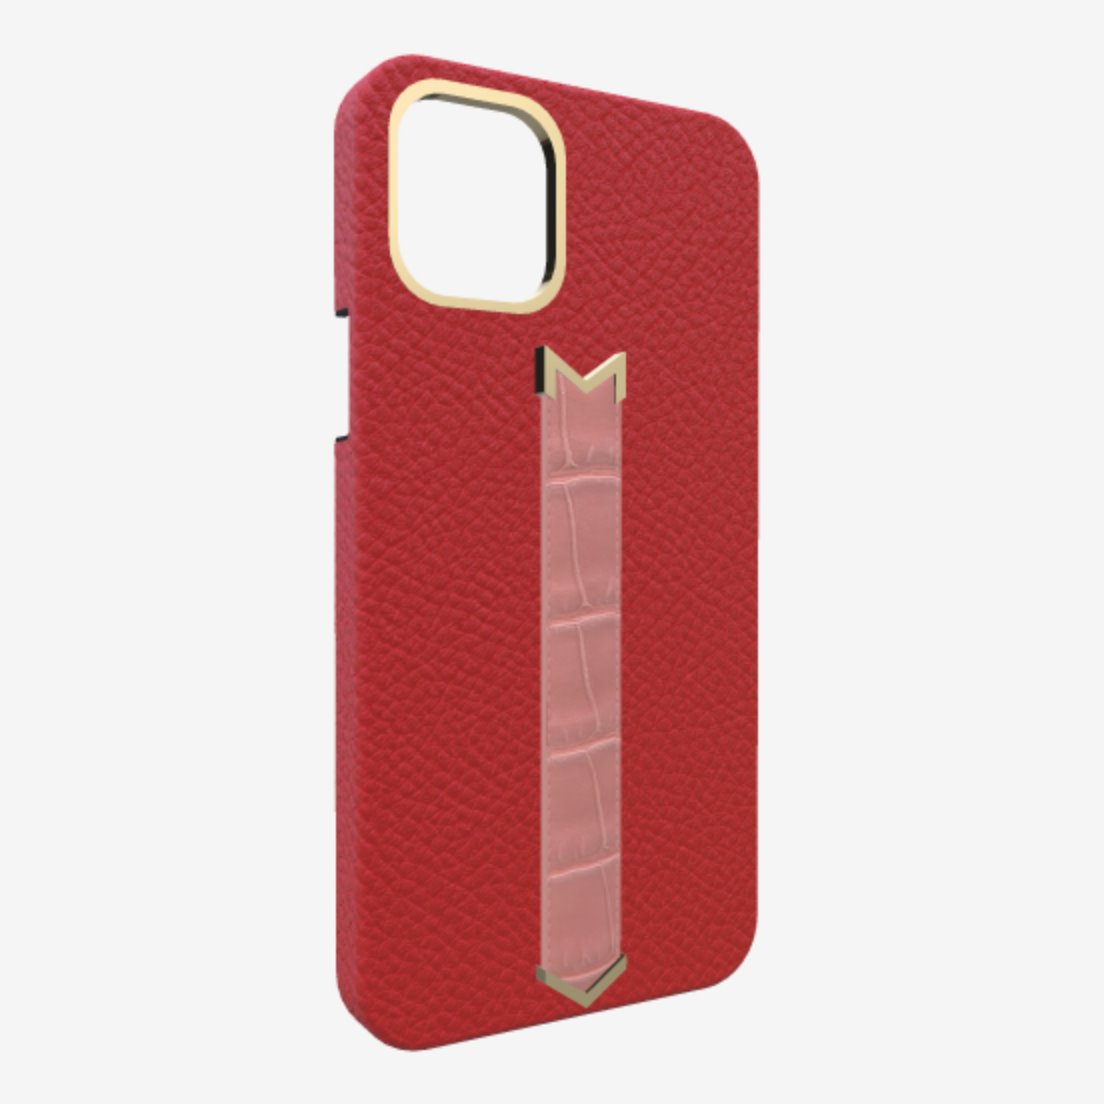 Gold Finger Strap Case for iPhone 13 Pro Max in Genuine Calfskin and Alligator Glamour Red Sweet Rose 